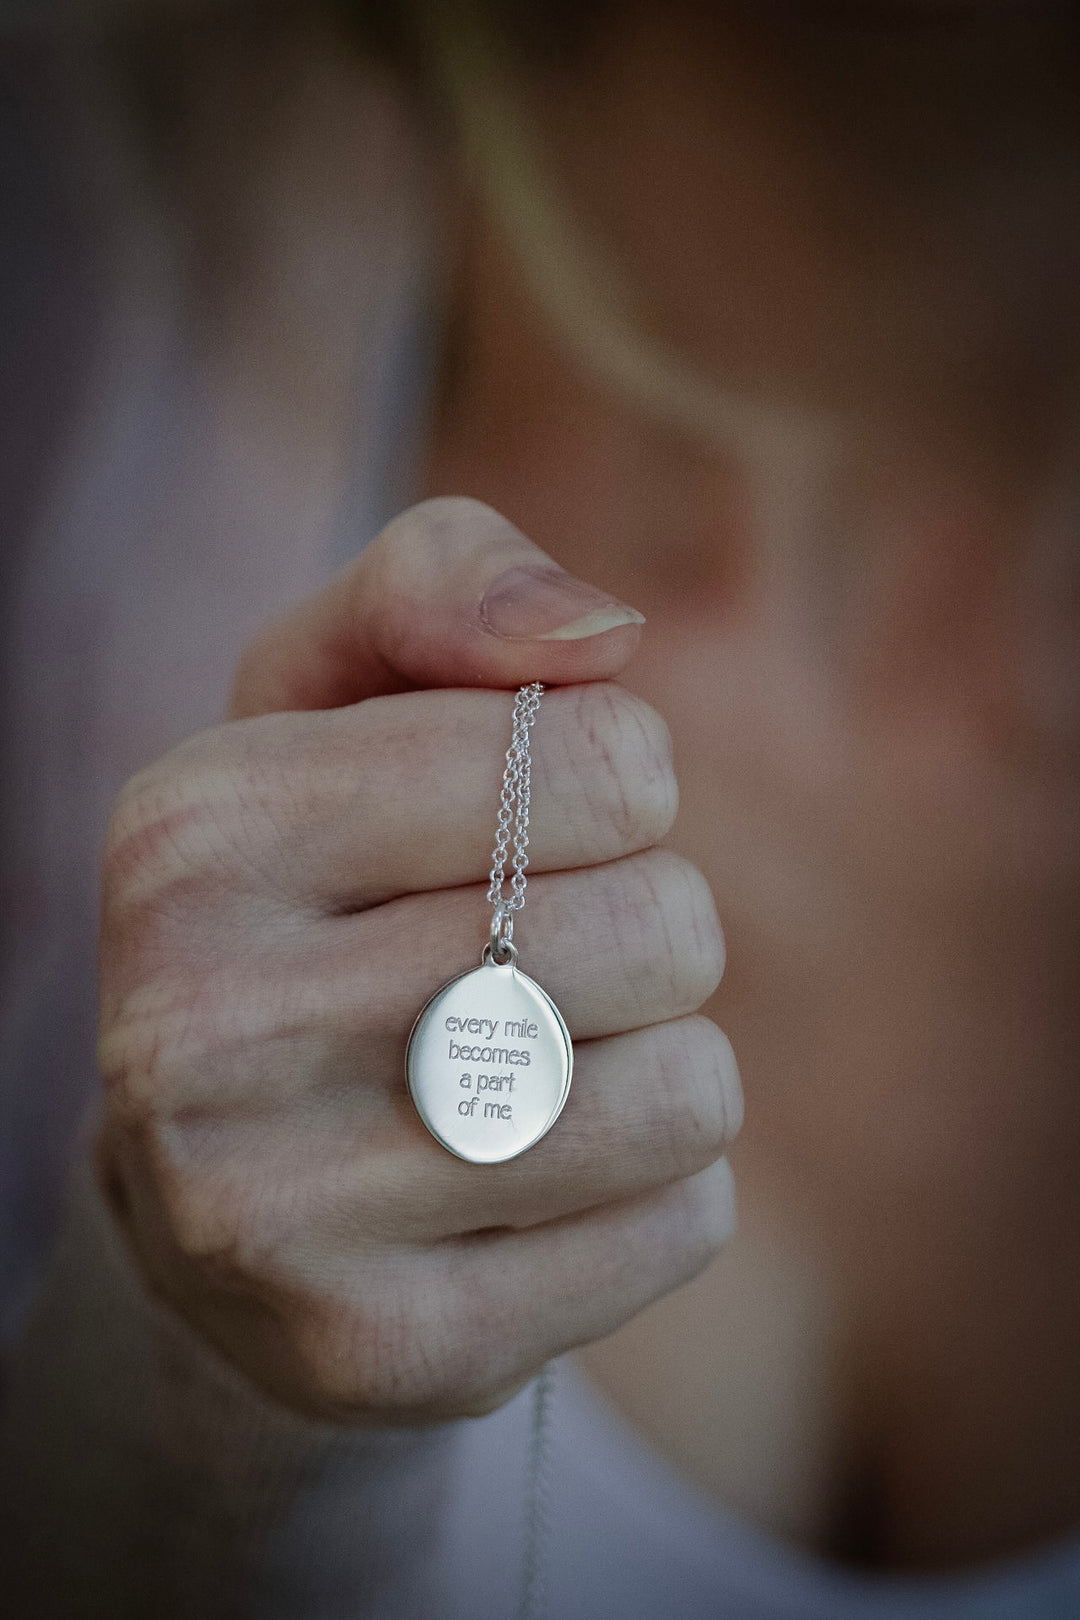 Custom engraved mantra necklace. Every mile becomes a part of me.